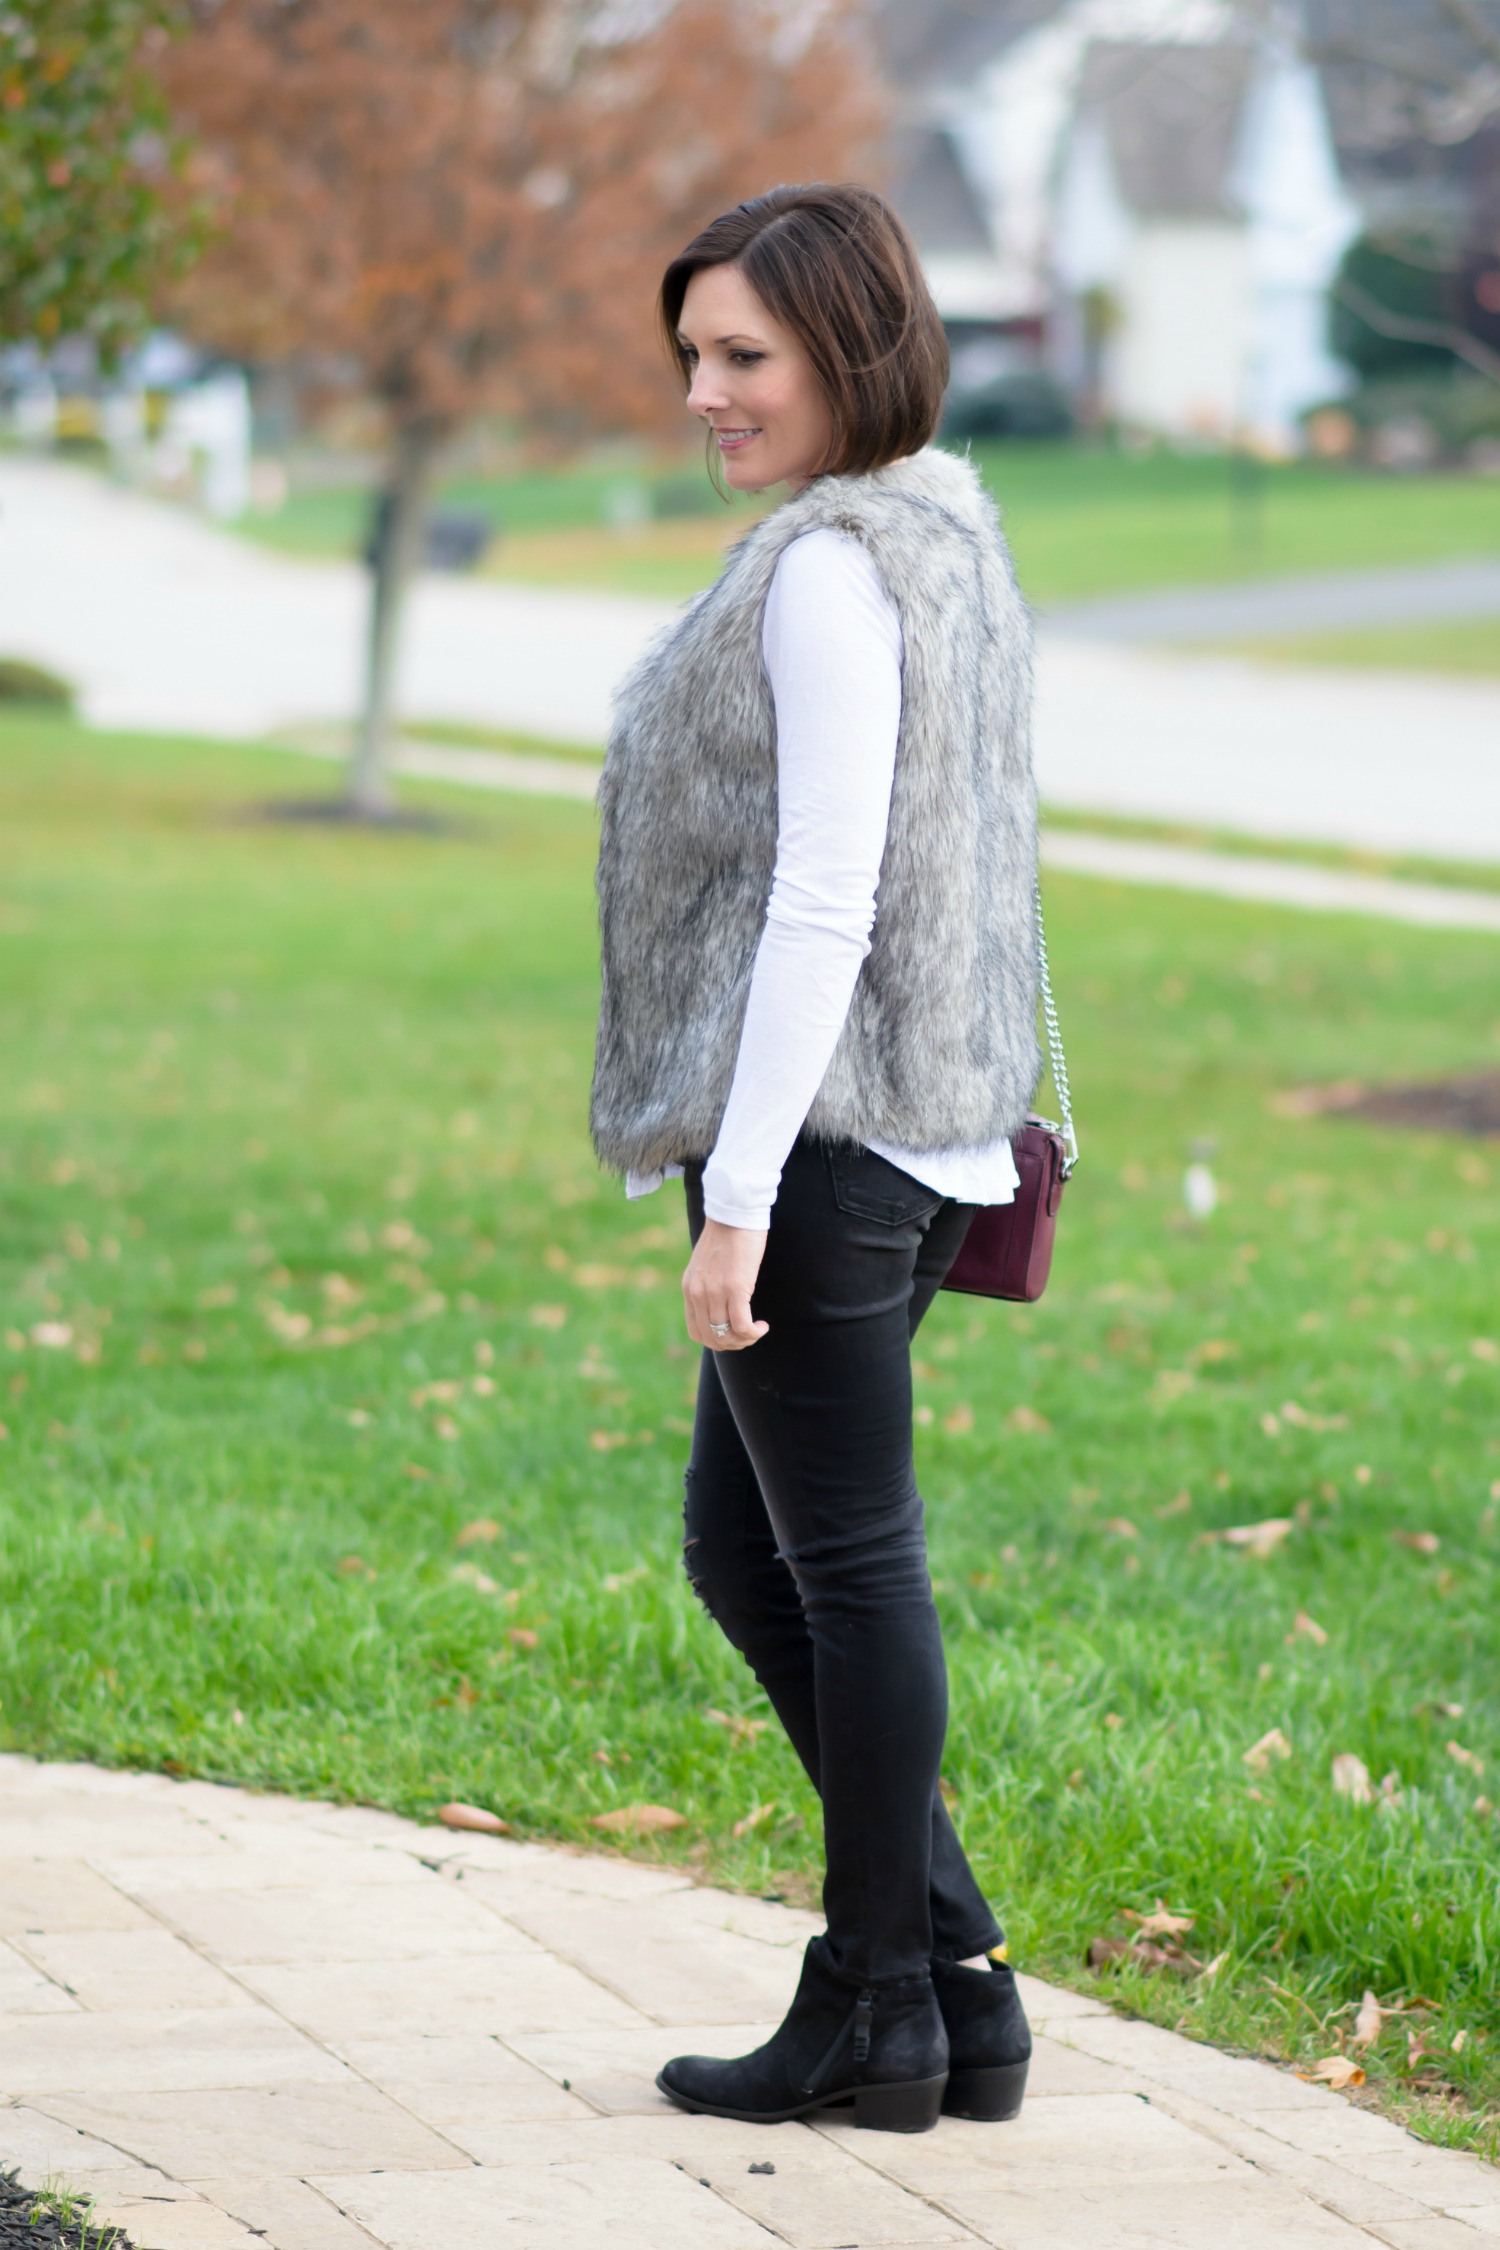 Winter Outfit Ideas: Fur Vest with Distressed Jeans and Long Sleeve Tee